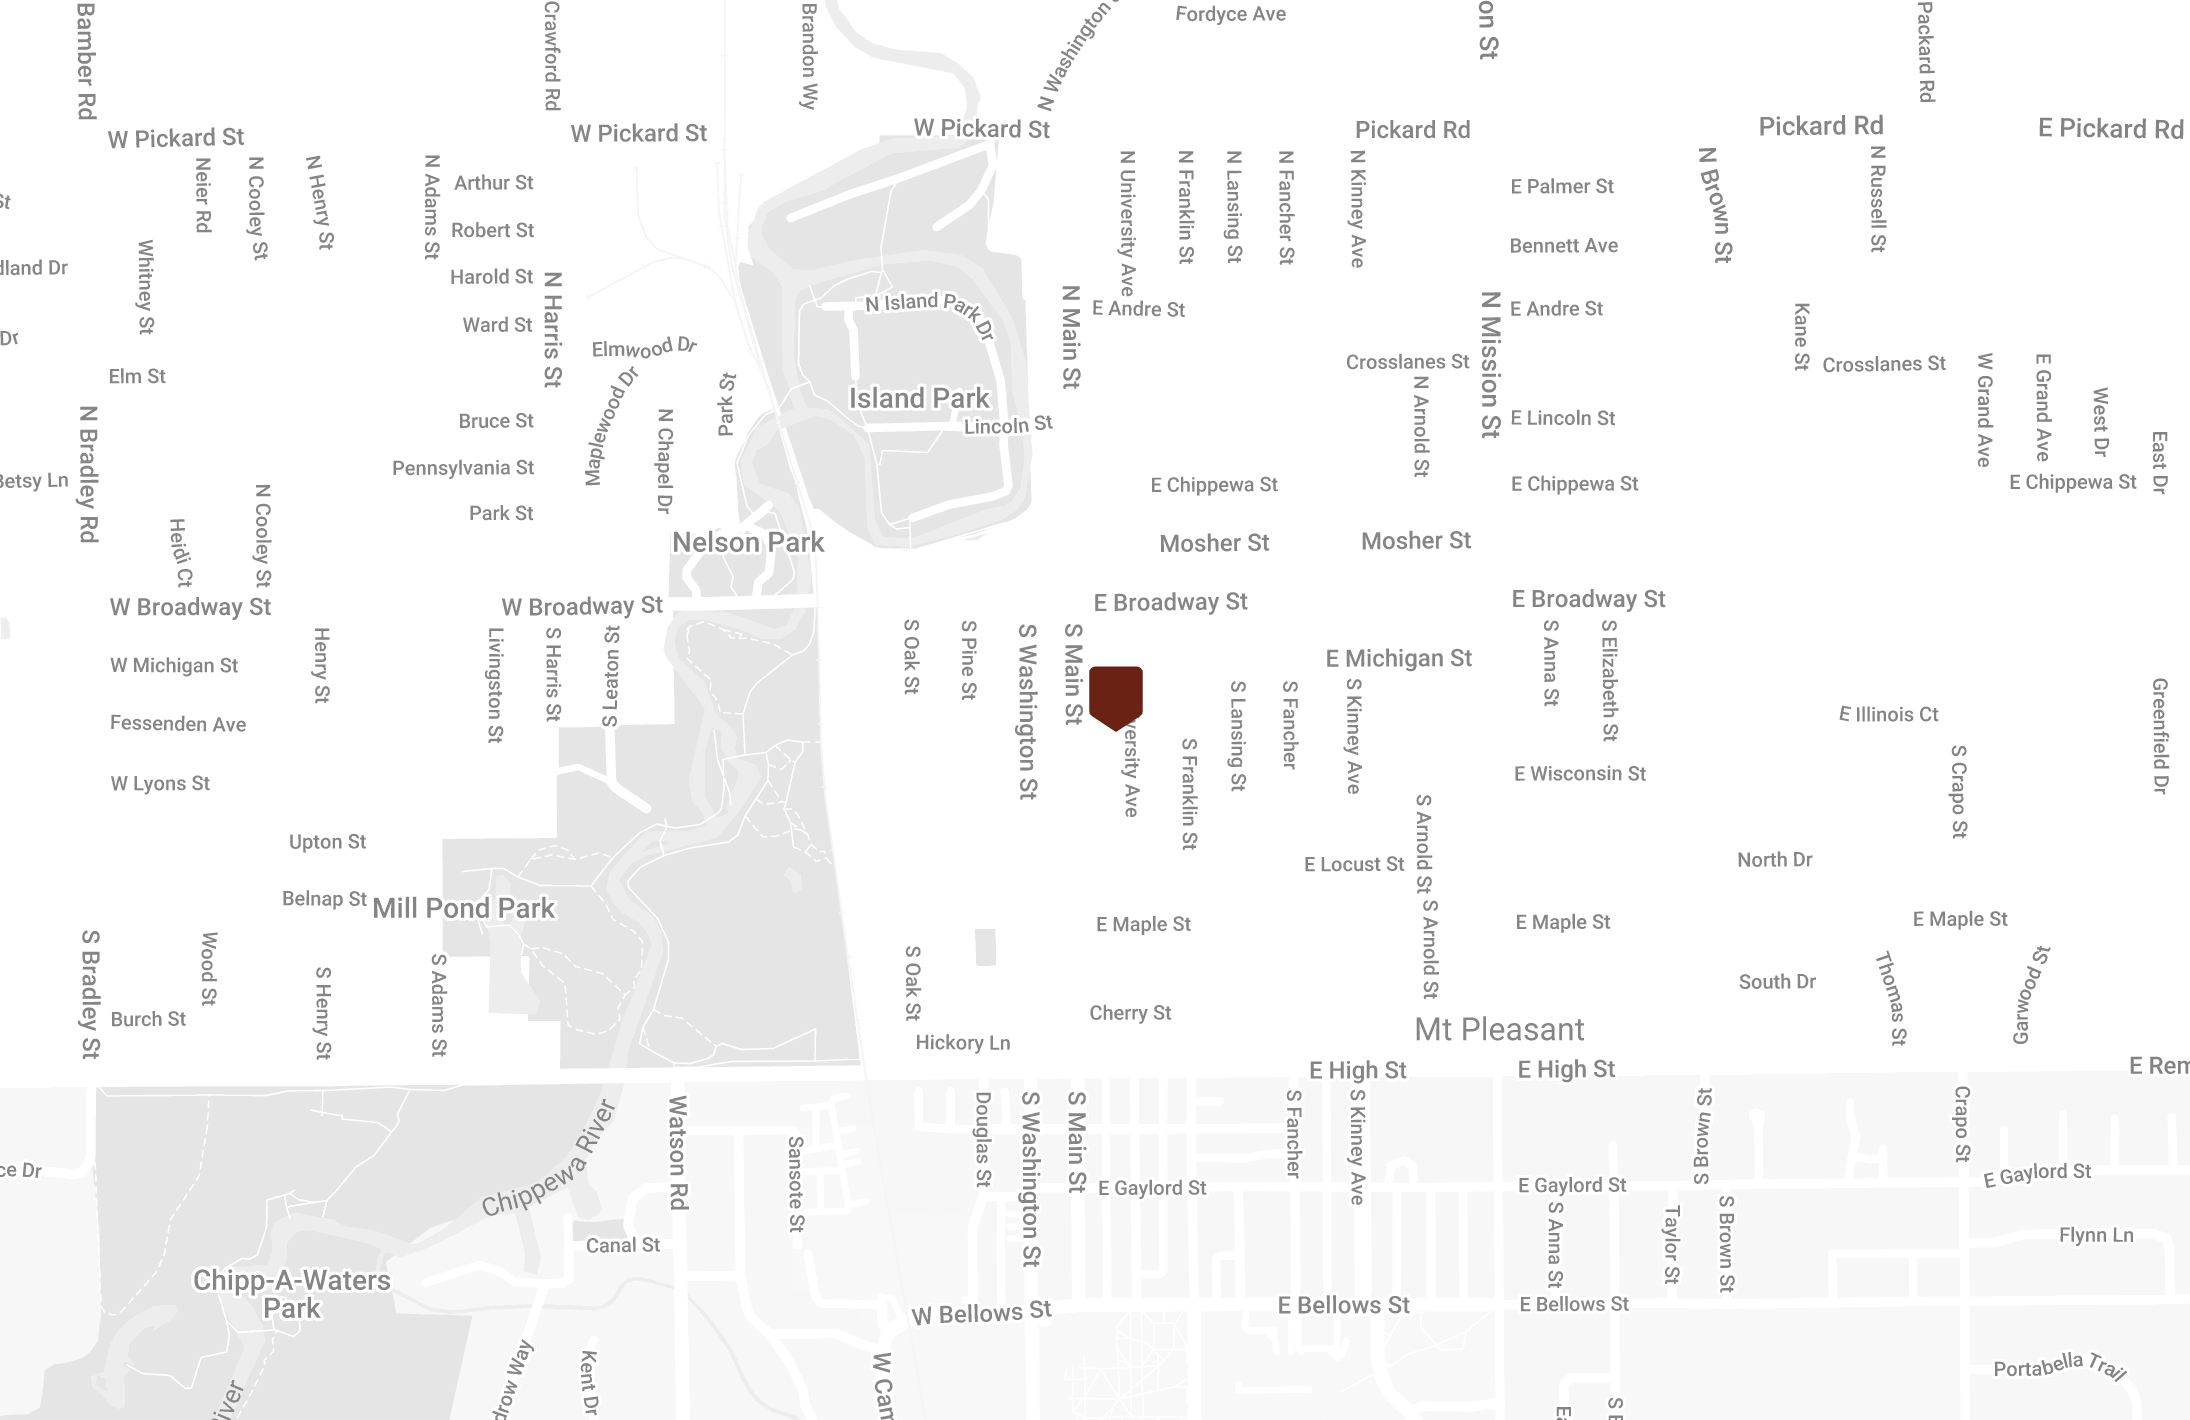 Map to attorney's office